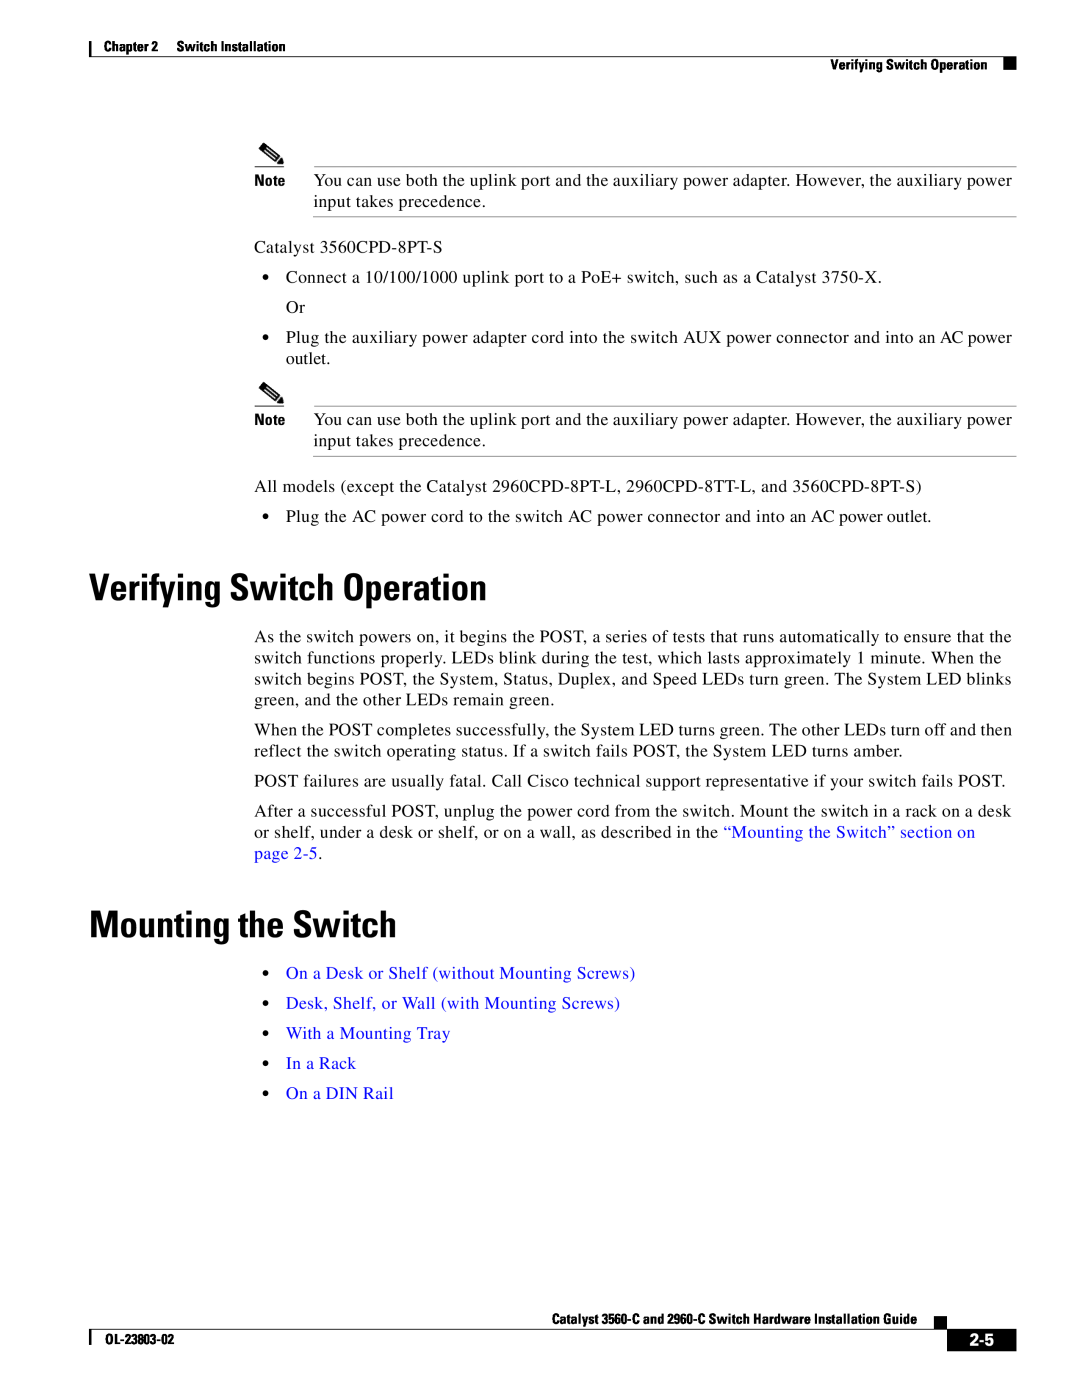 Cisco Systems 3560-C manual Verifying Switch Operation, Mounting the Switch, On a Desk or Shelf without Mounting Screws 